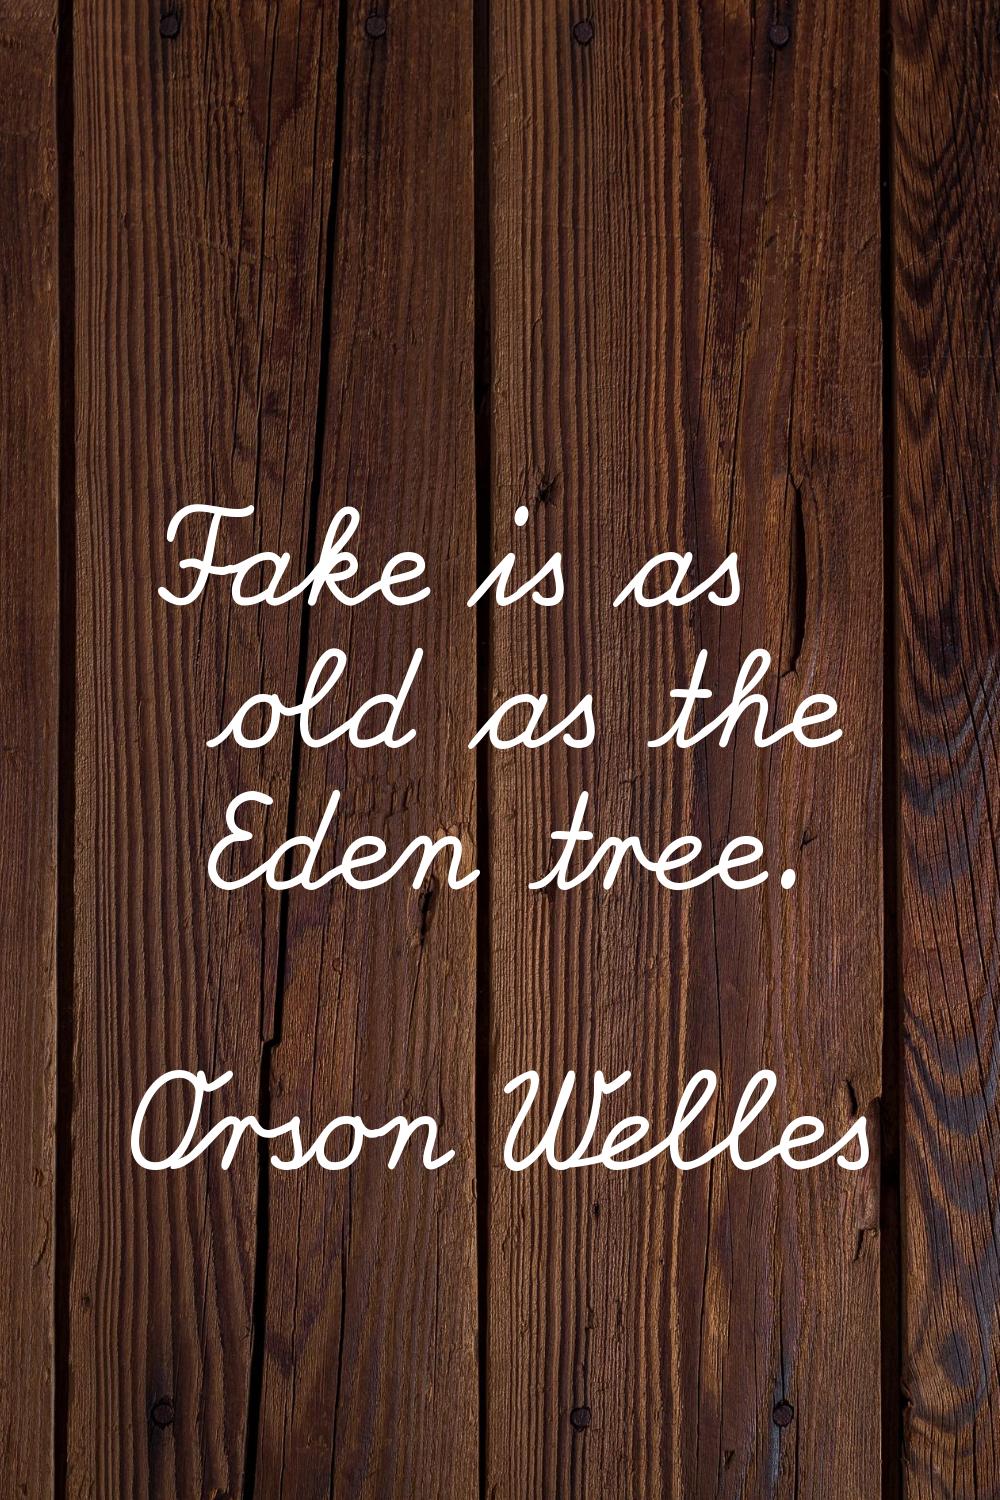 Fake is as old as the Eden tree.